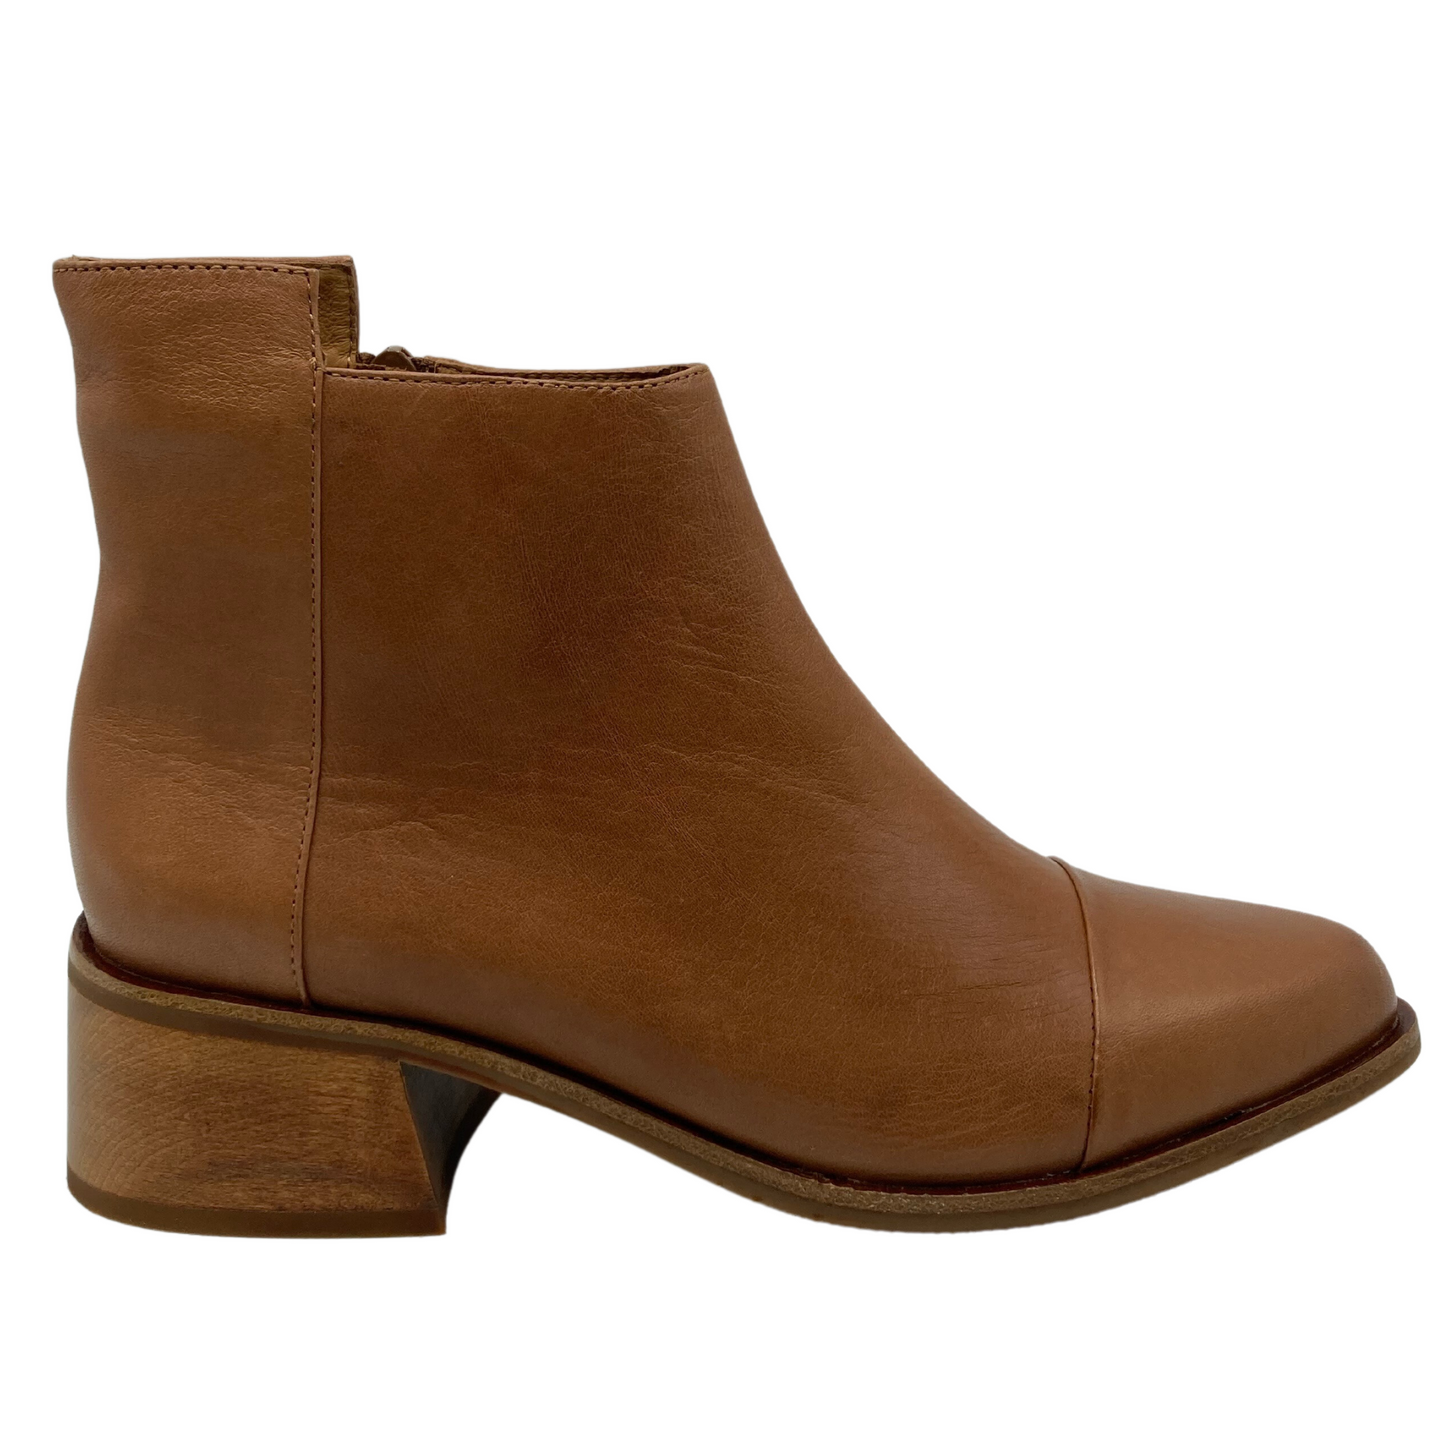 Right facing view of brown leather ankle boot with pointed toe and block heel